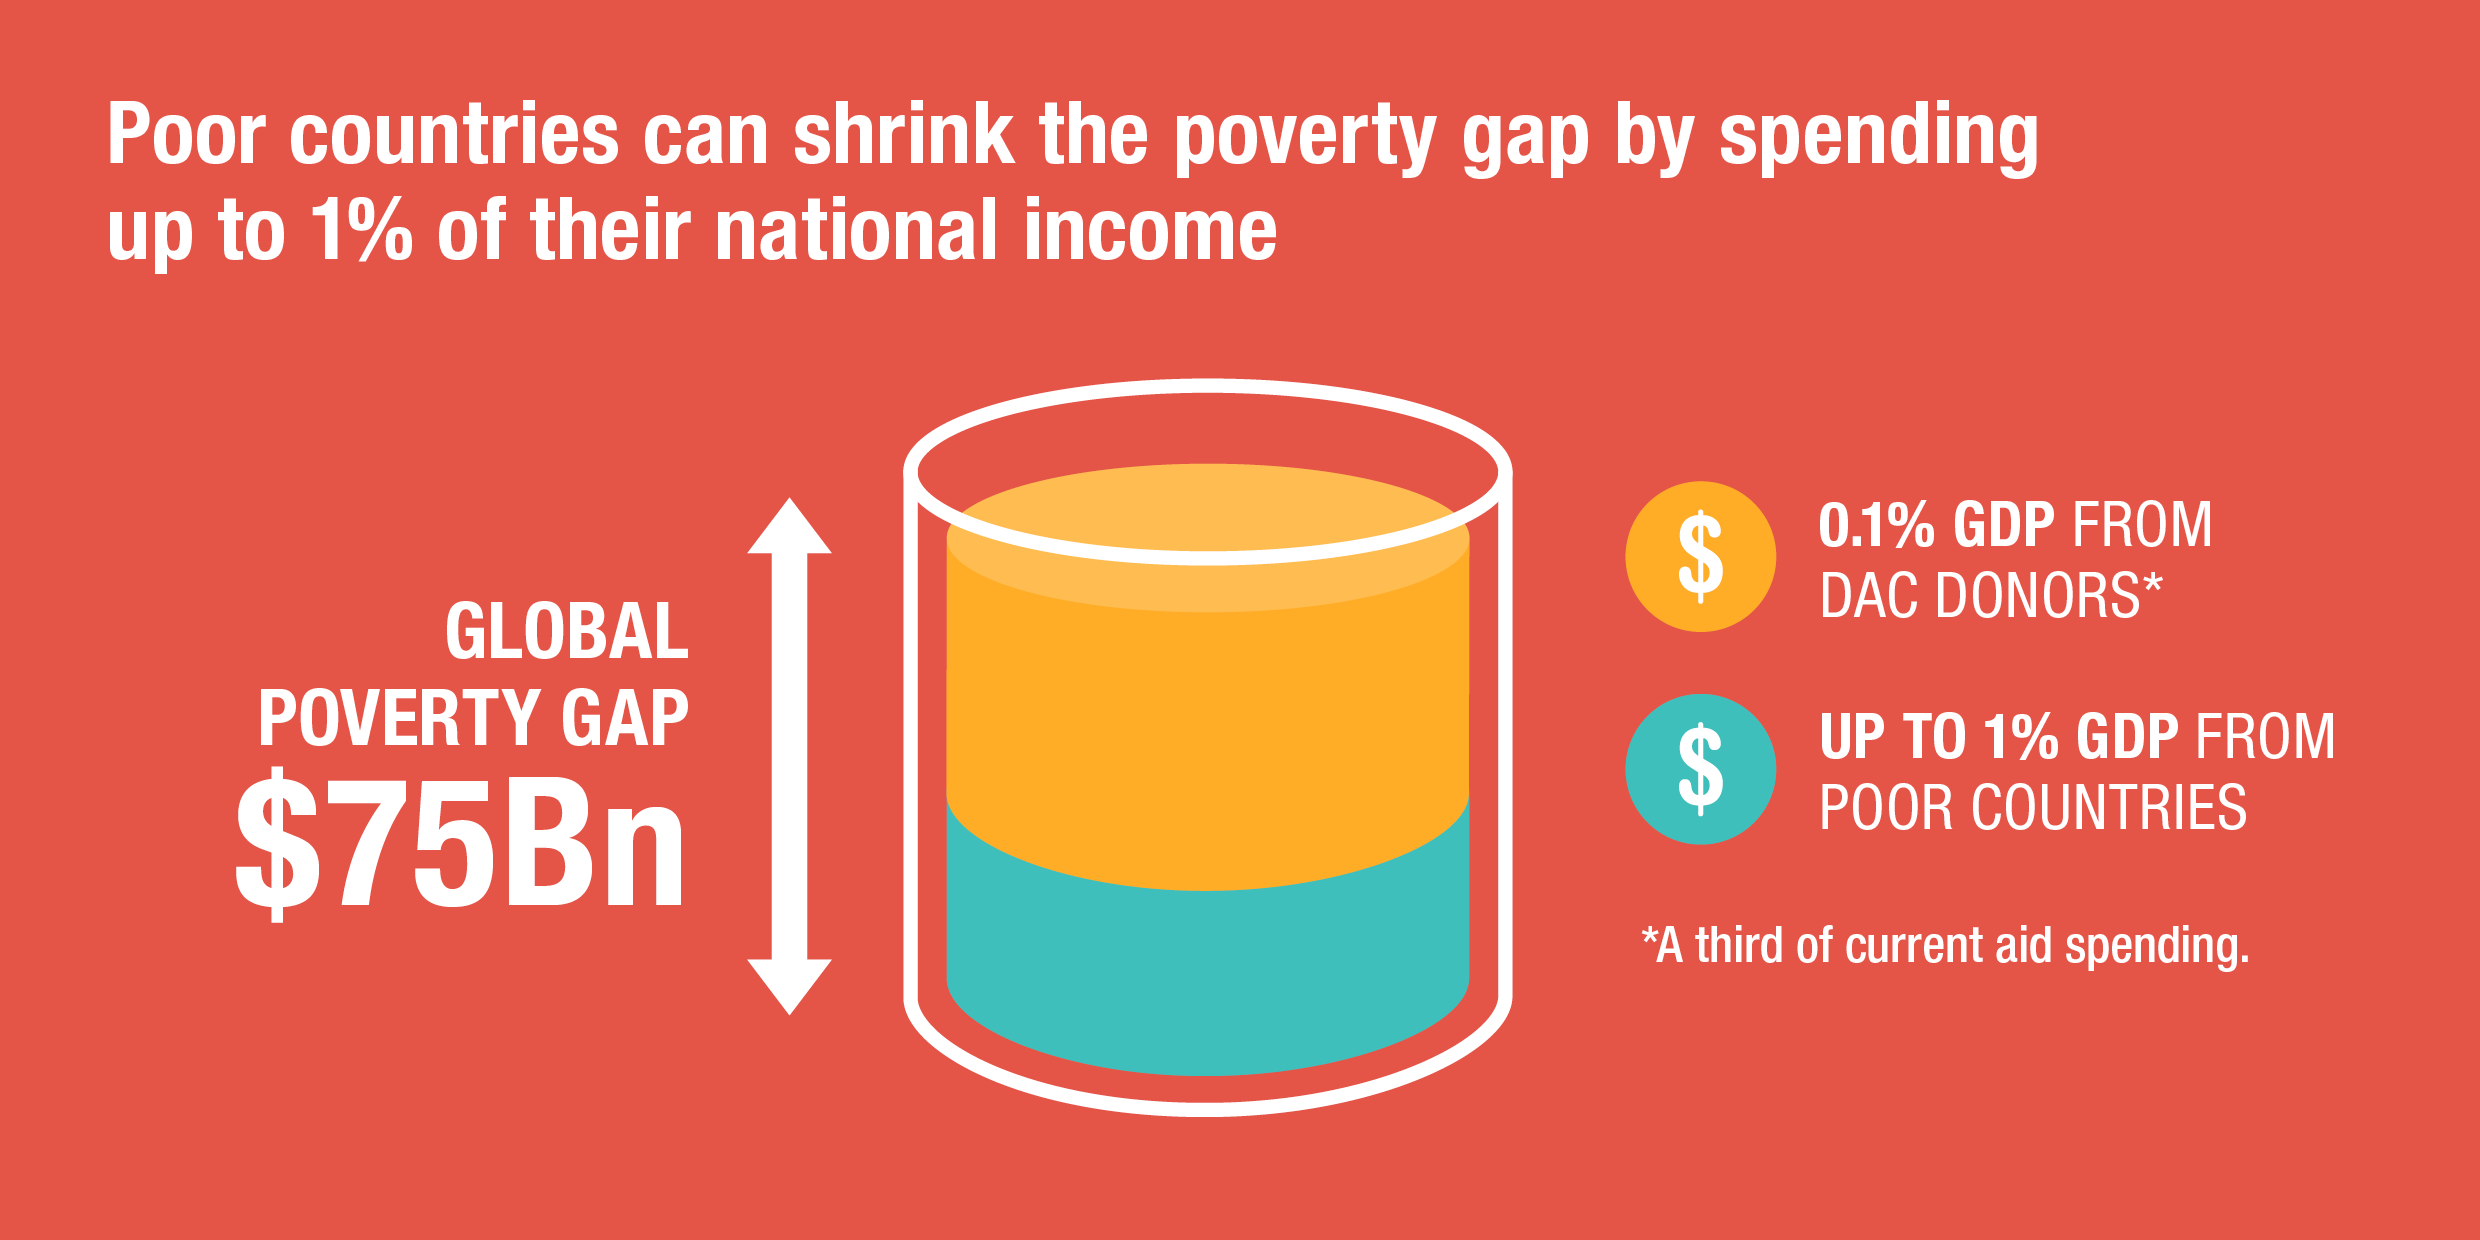 Poor countries can shrink the poverty gap by spending up to 1% of their national income